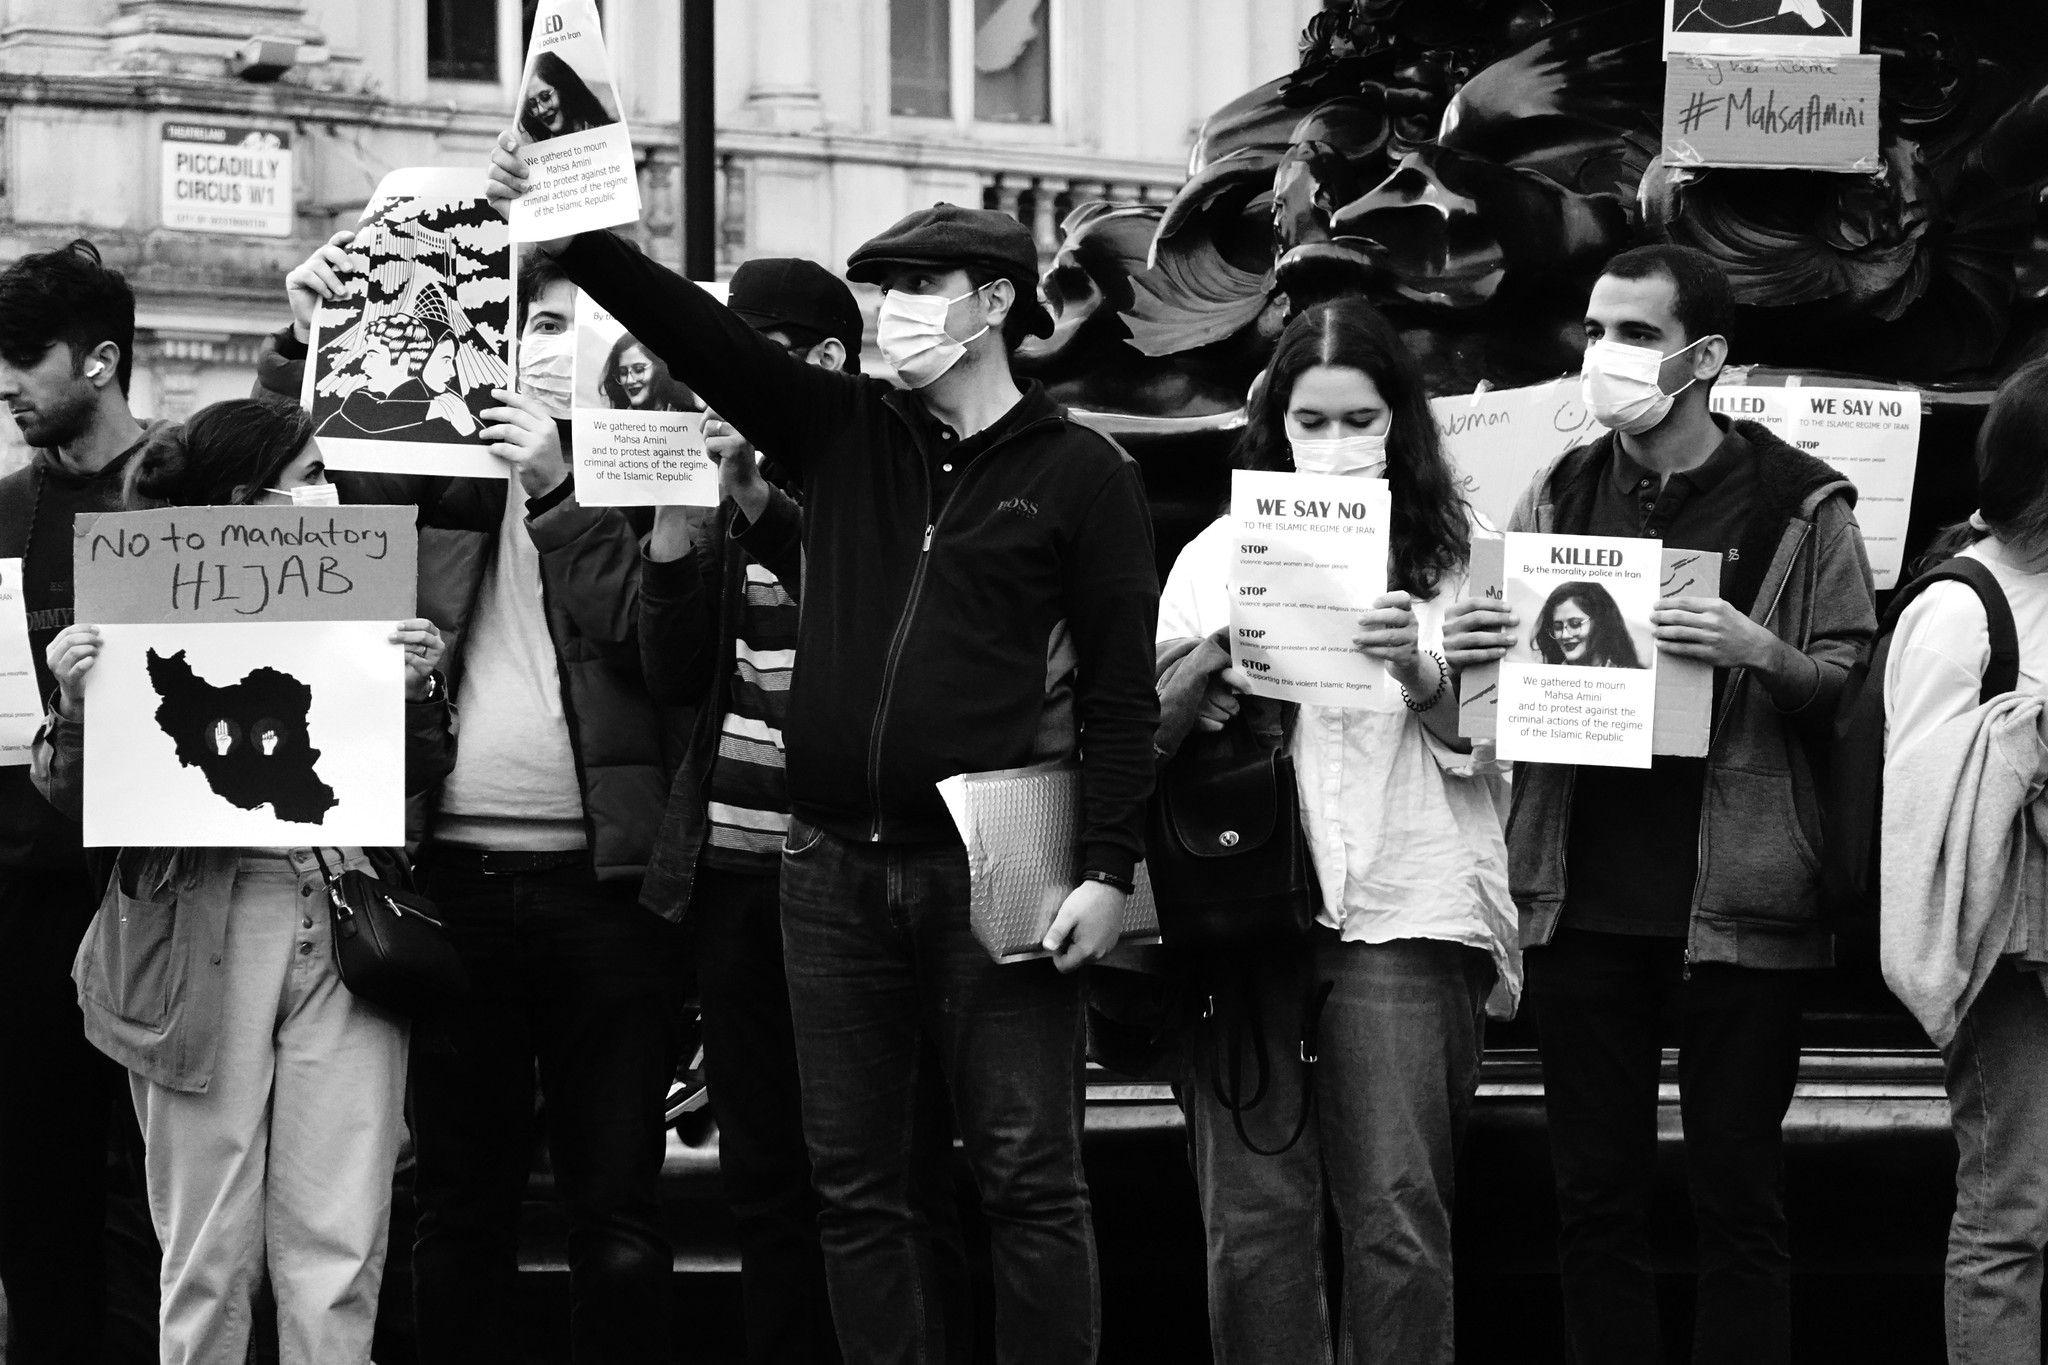 Protest at London's Piccadilly Circus against mandatory hijab in Iran. 